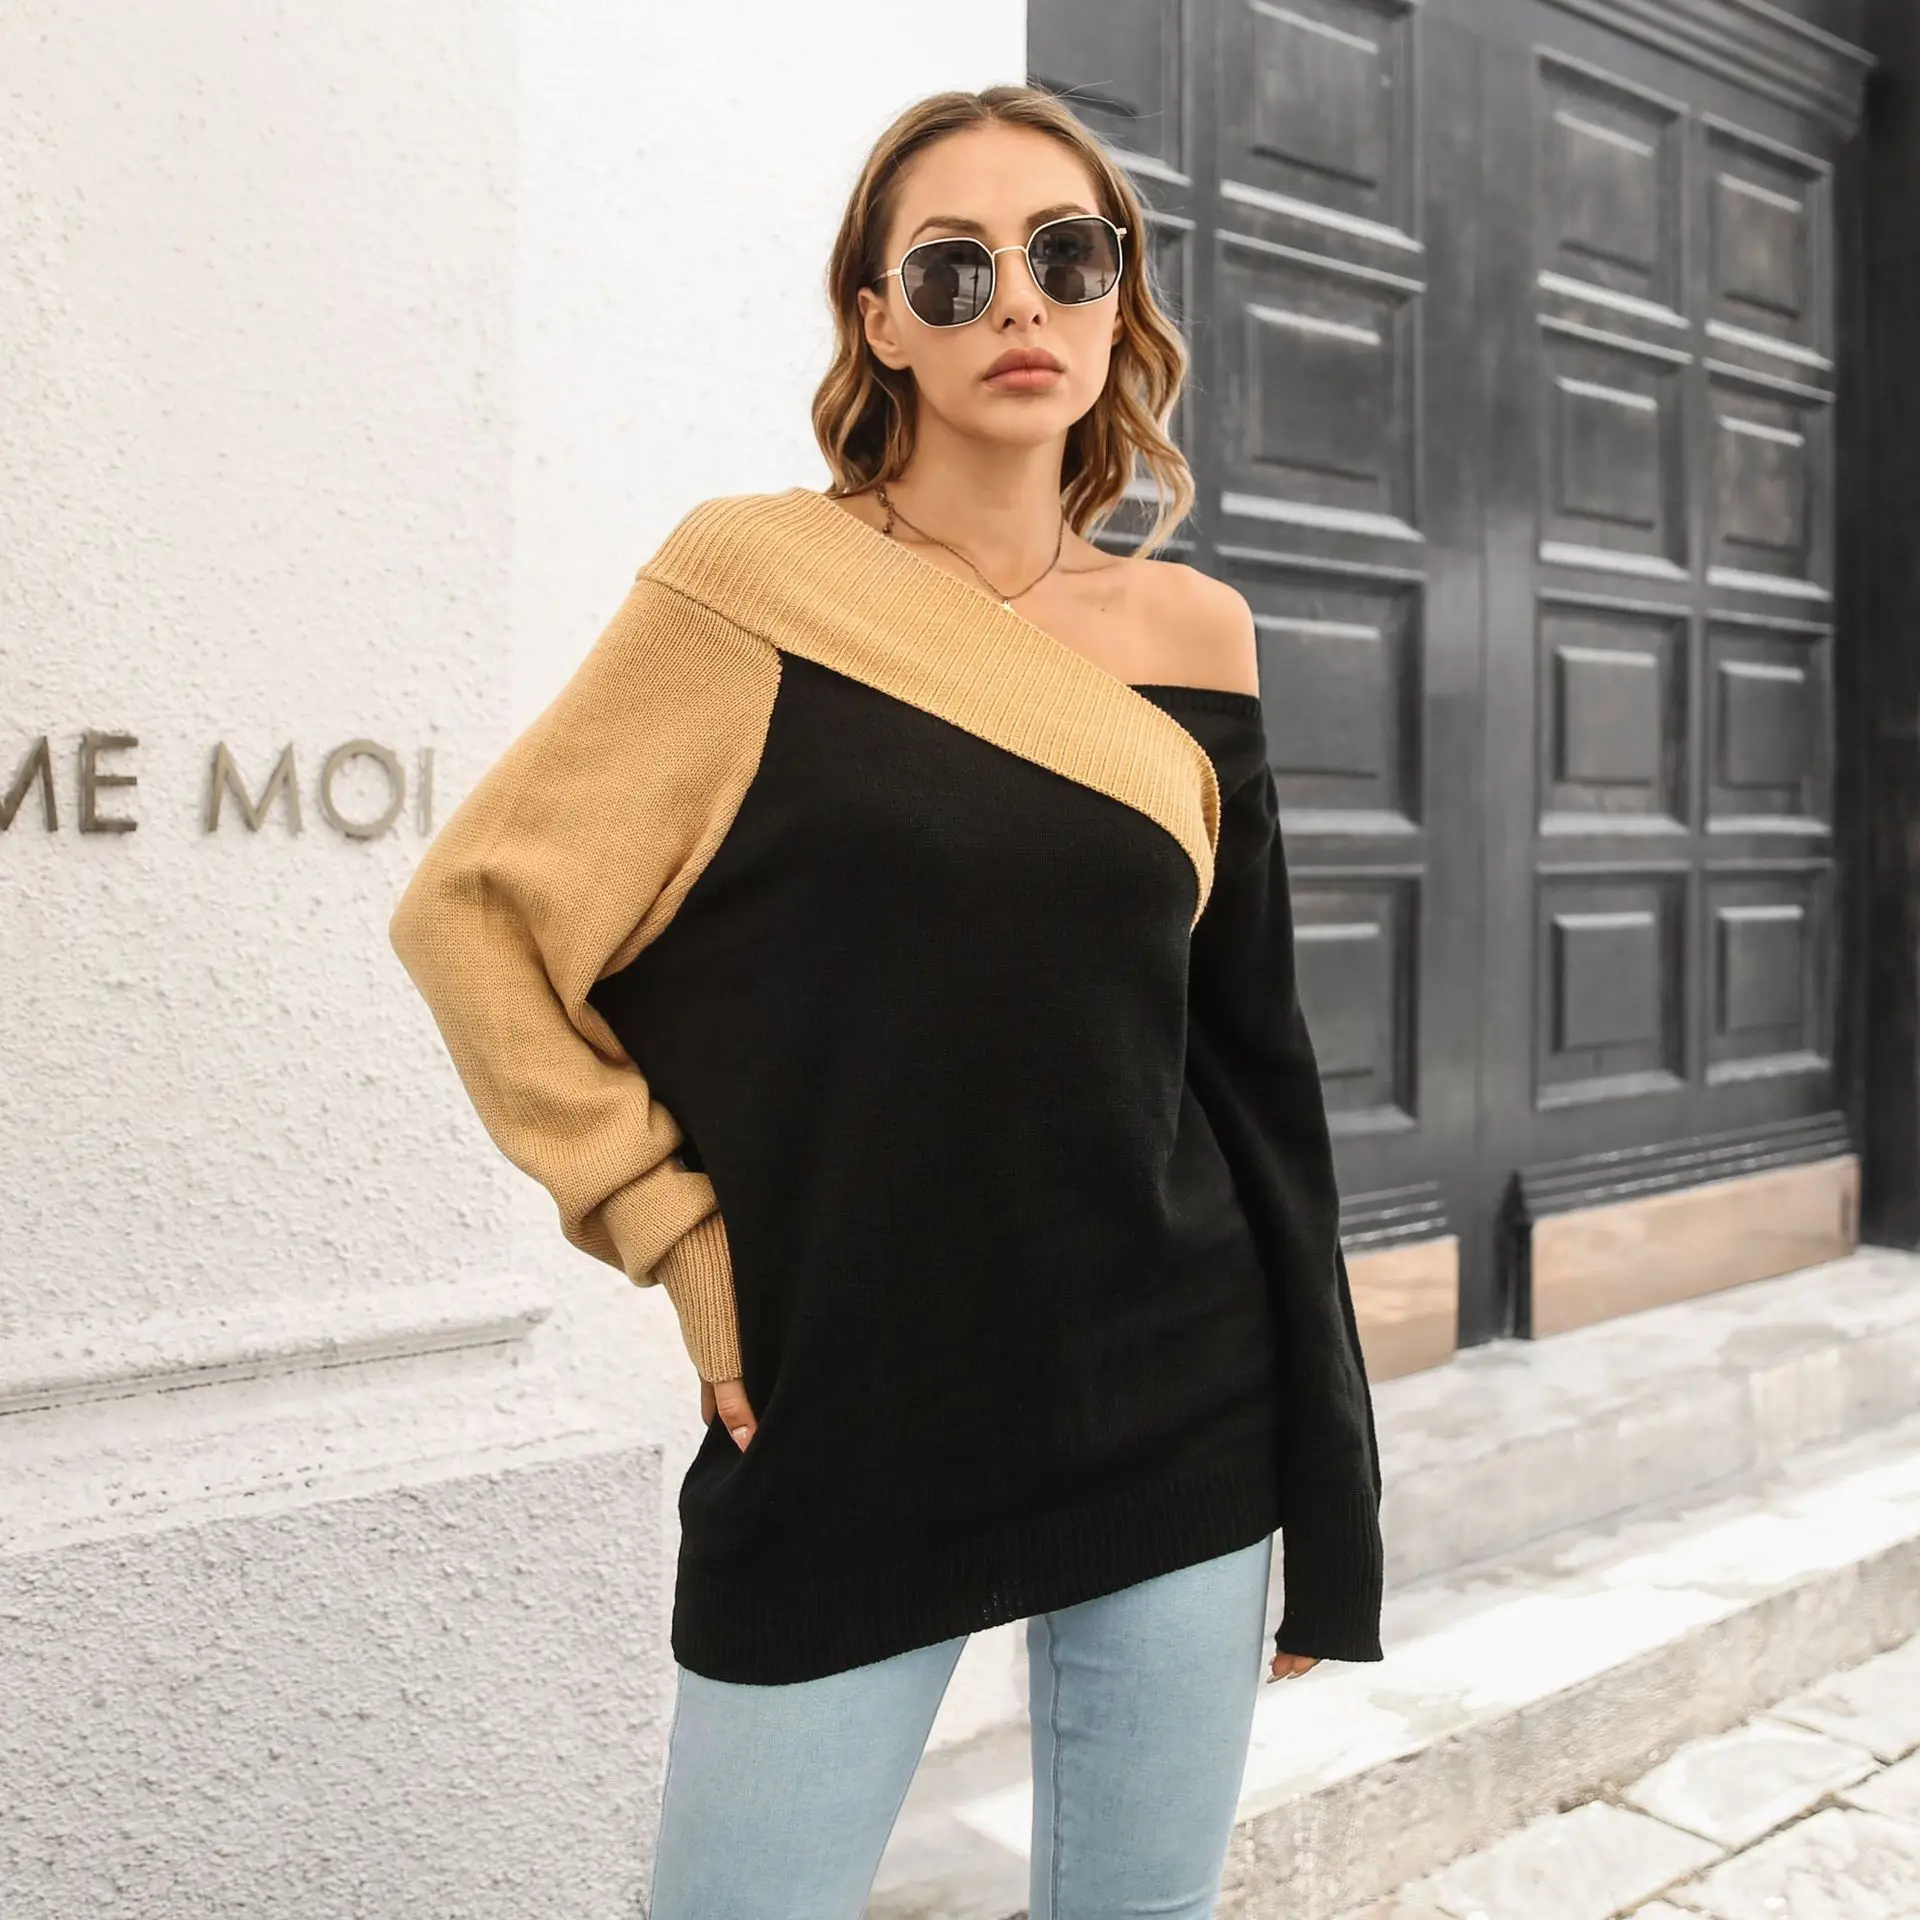 Design Sense Word Neck Sweater Women Loose Autumn and Winter Long Sleeve Knitted Sweater New Style свитер оверсайз enlarge